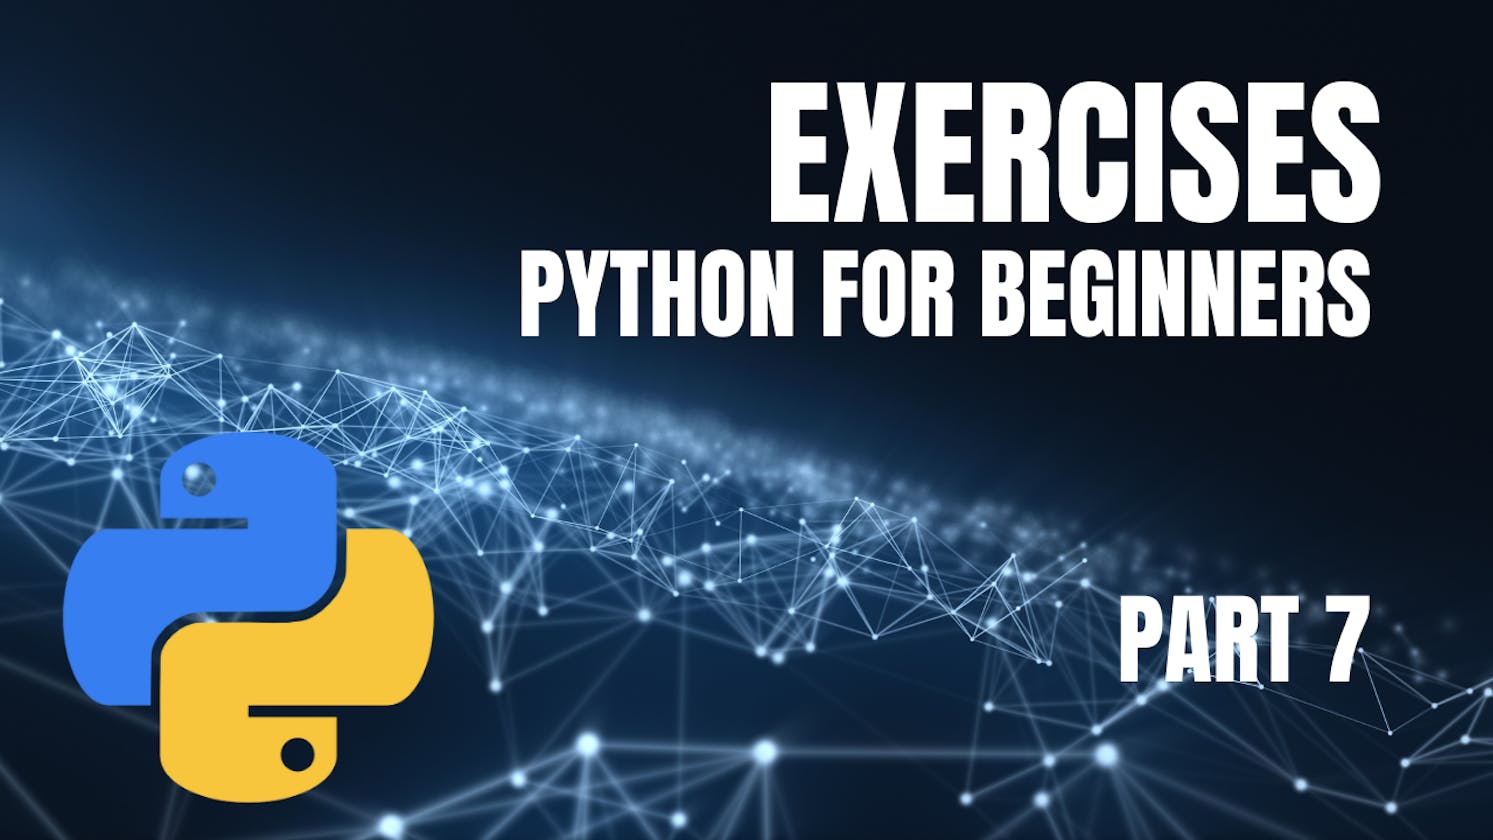 Python for Beginners: Part 7 - Exercises